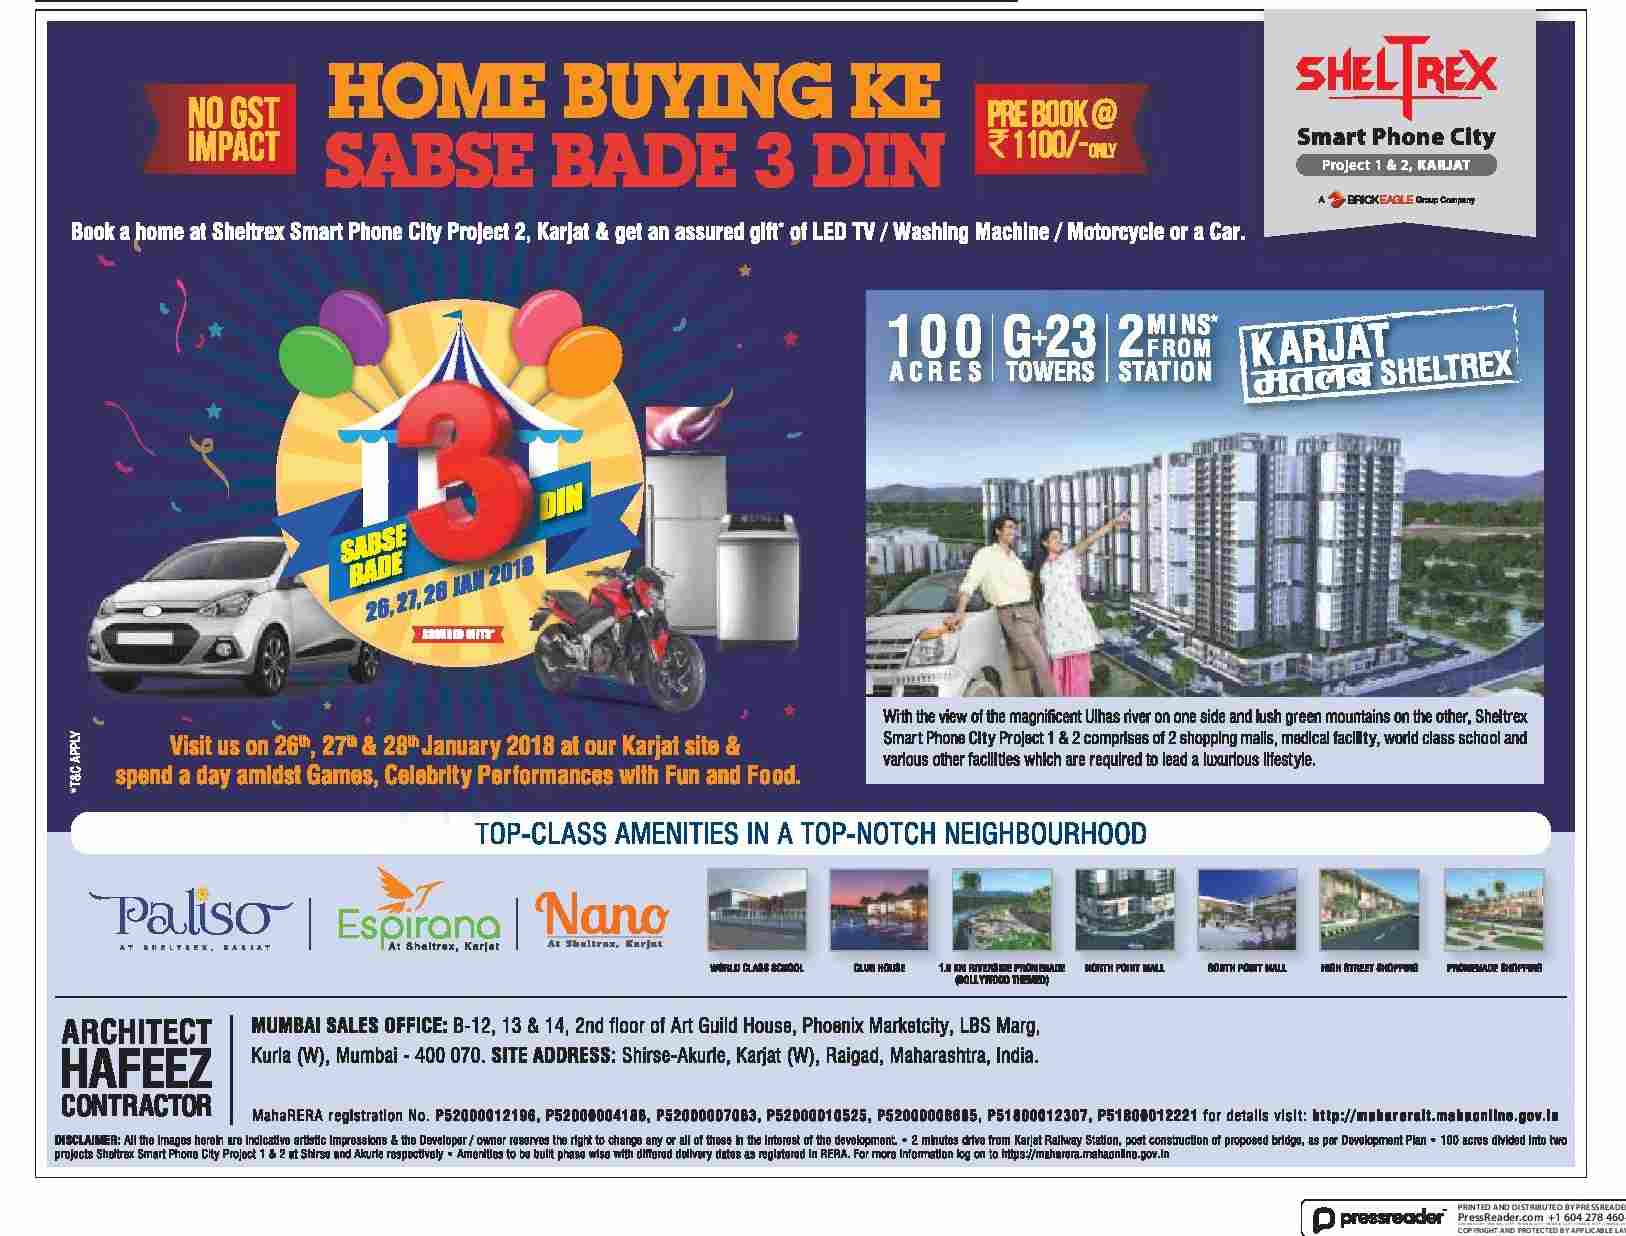 Book a home at Sheltrex Smart Phone City Project 2 & get assured gift Update